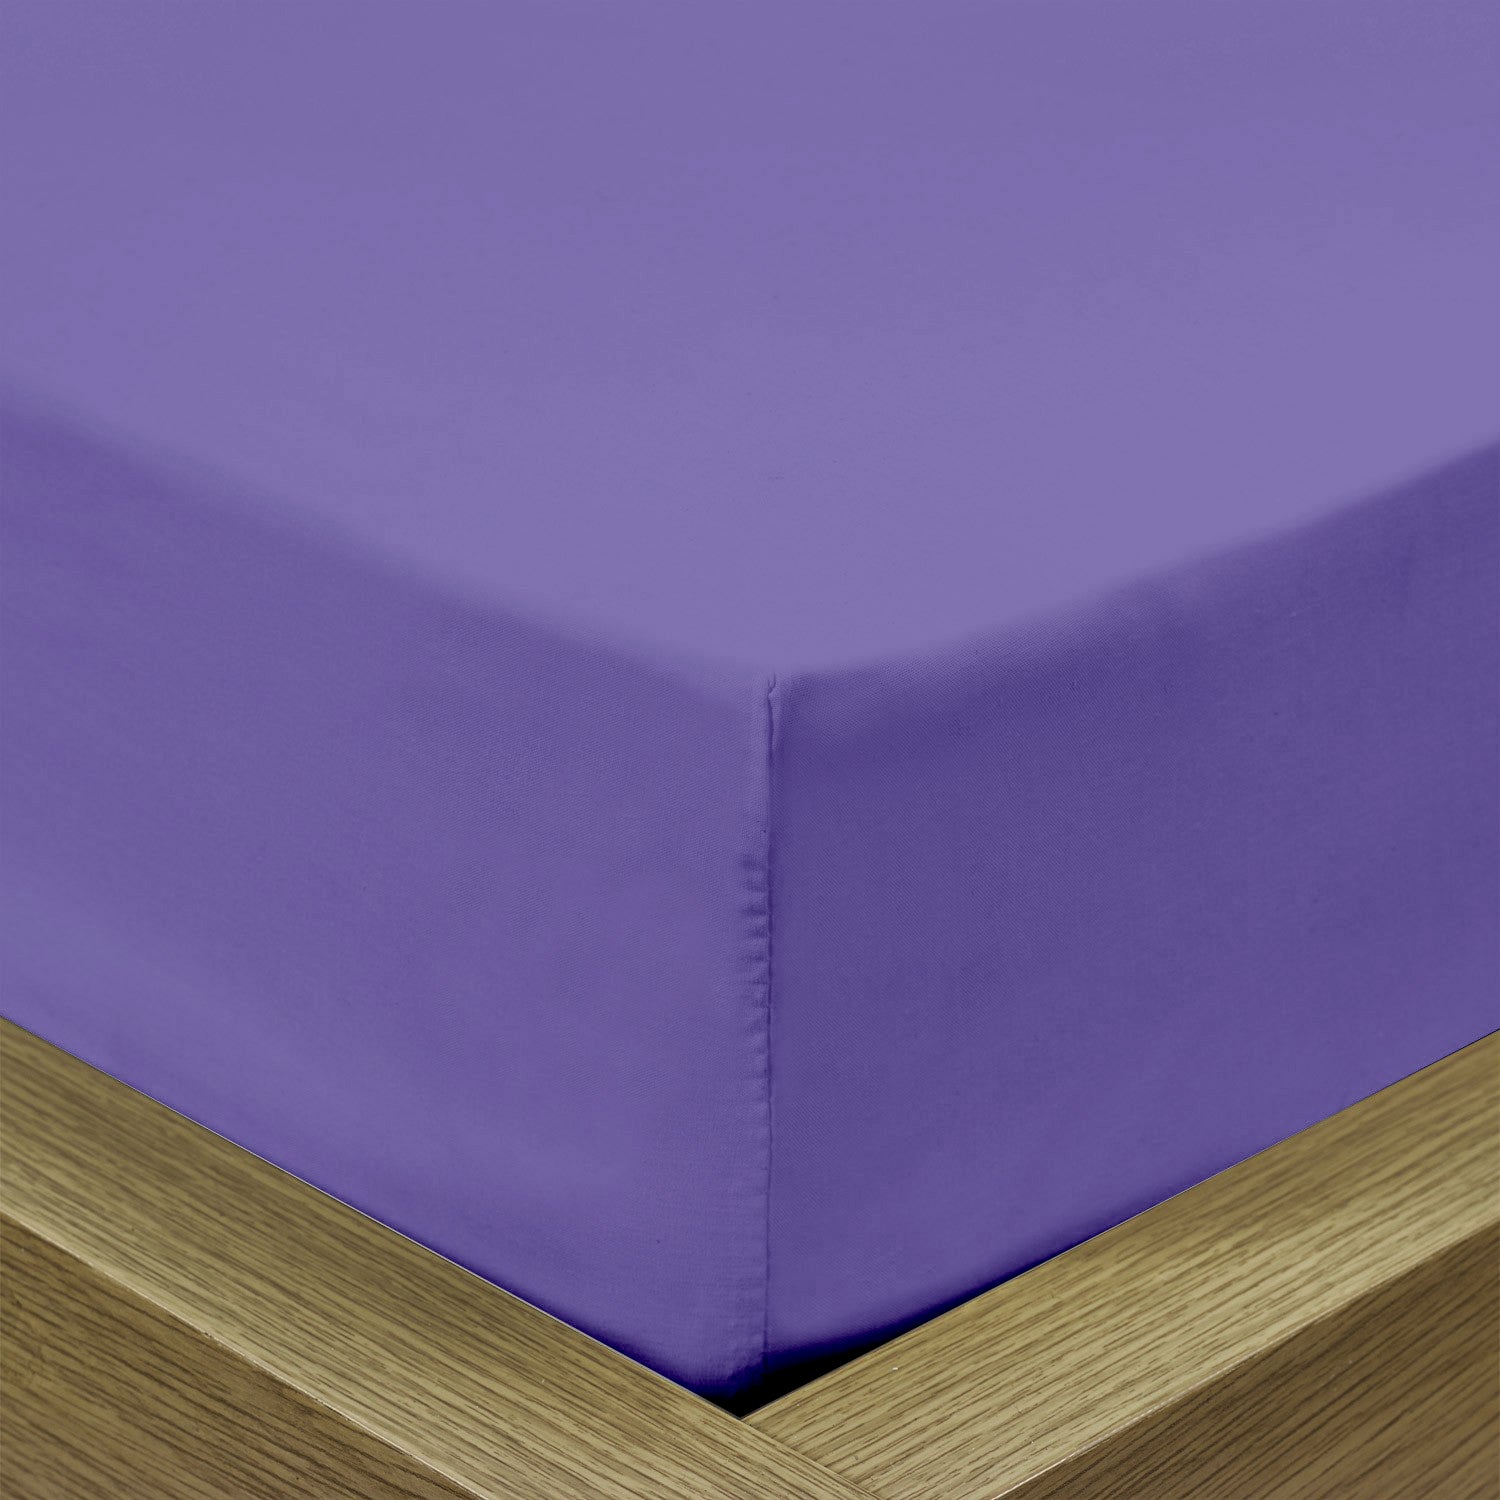 Premium Quality Super Soft Purple Fitted sheet 120x200+25 cm with Deep Pockets